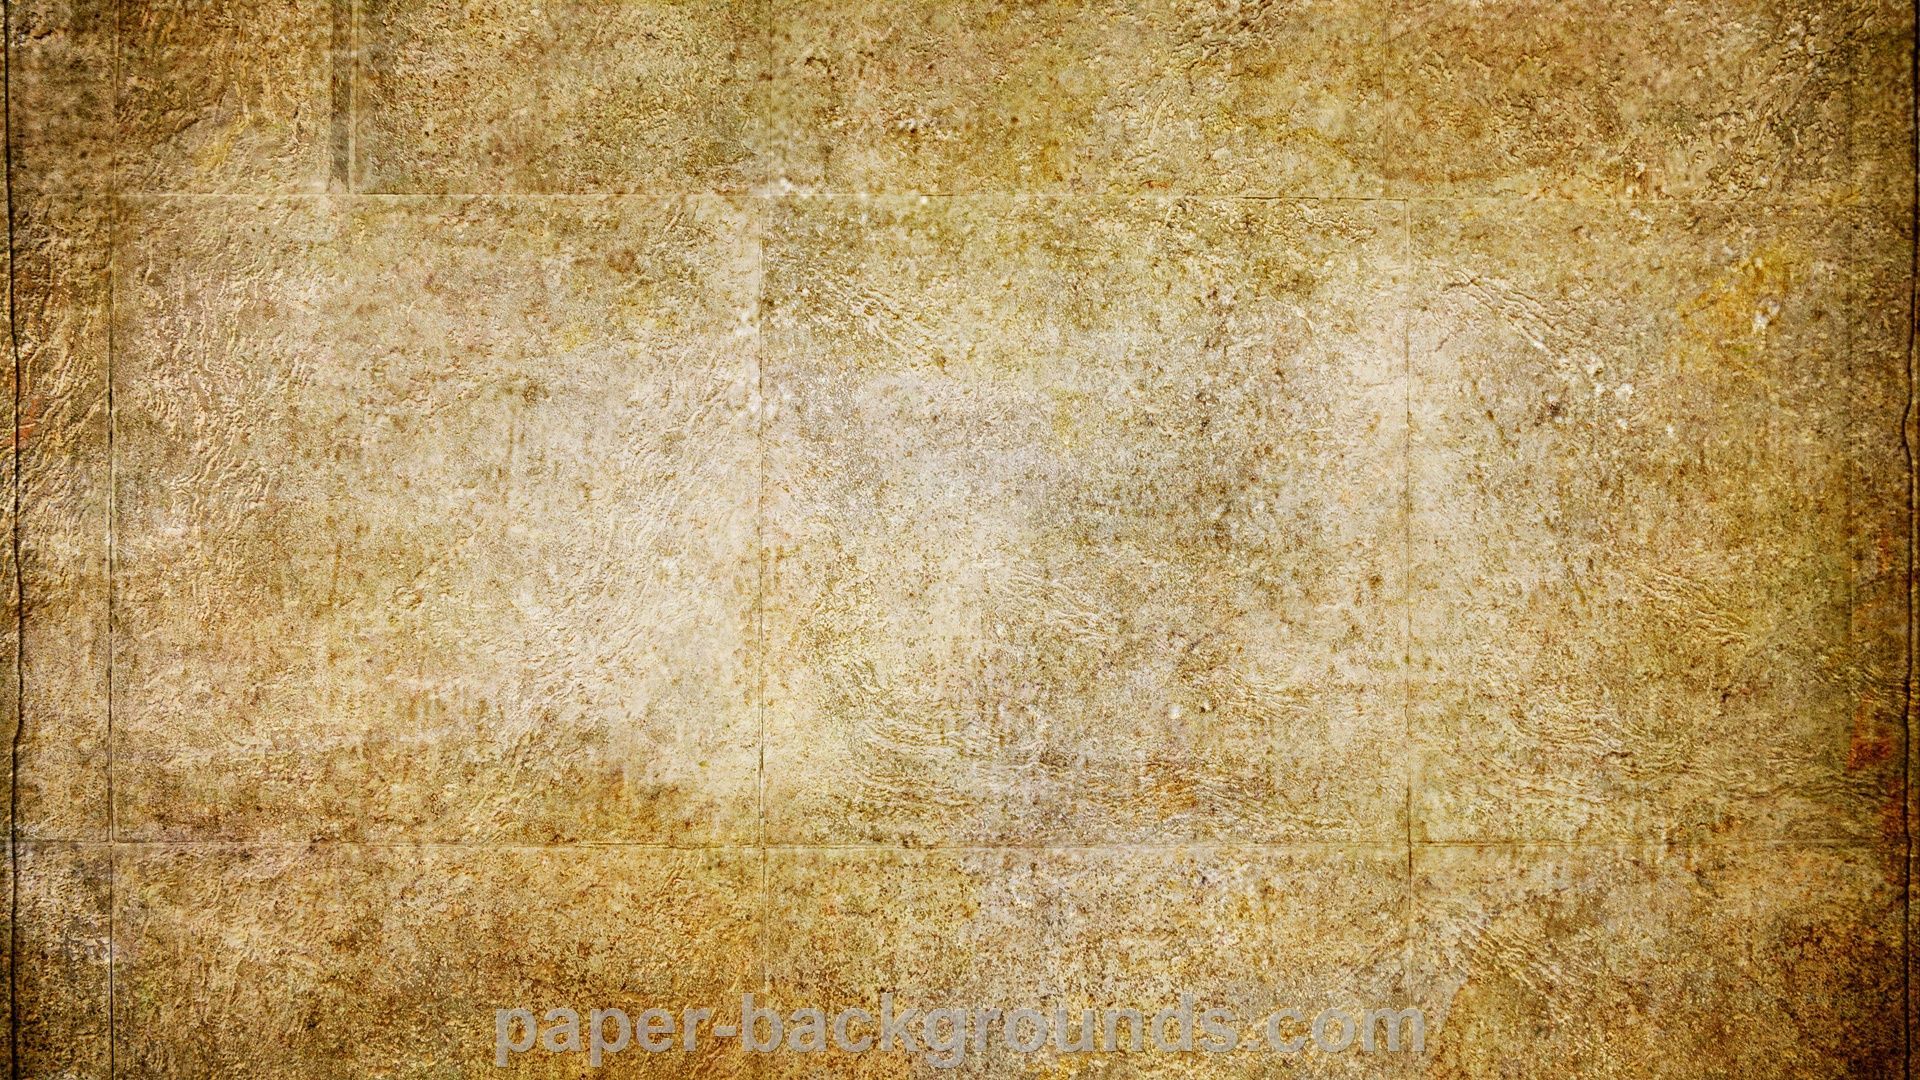 Grunge Paper Texture Wallpapers